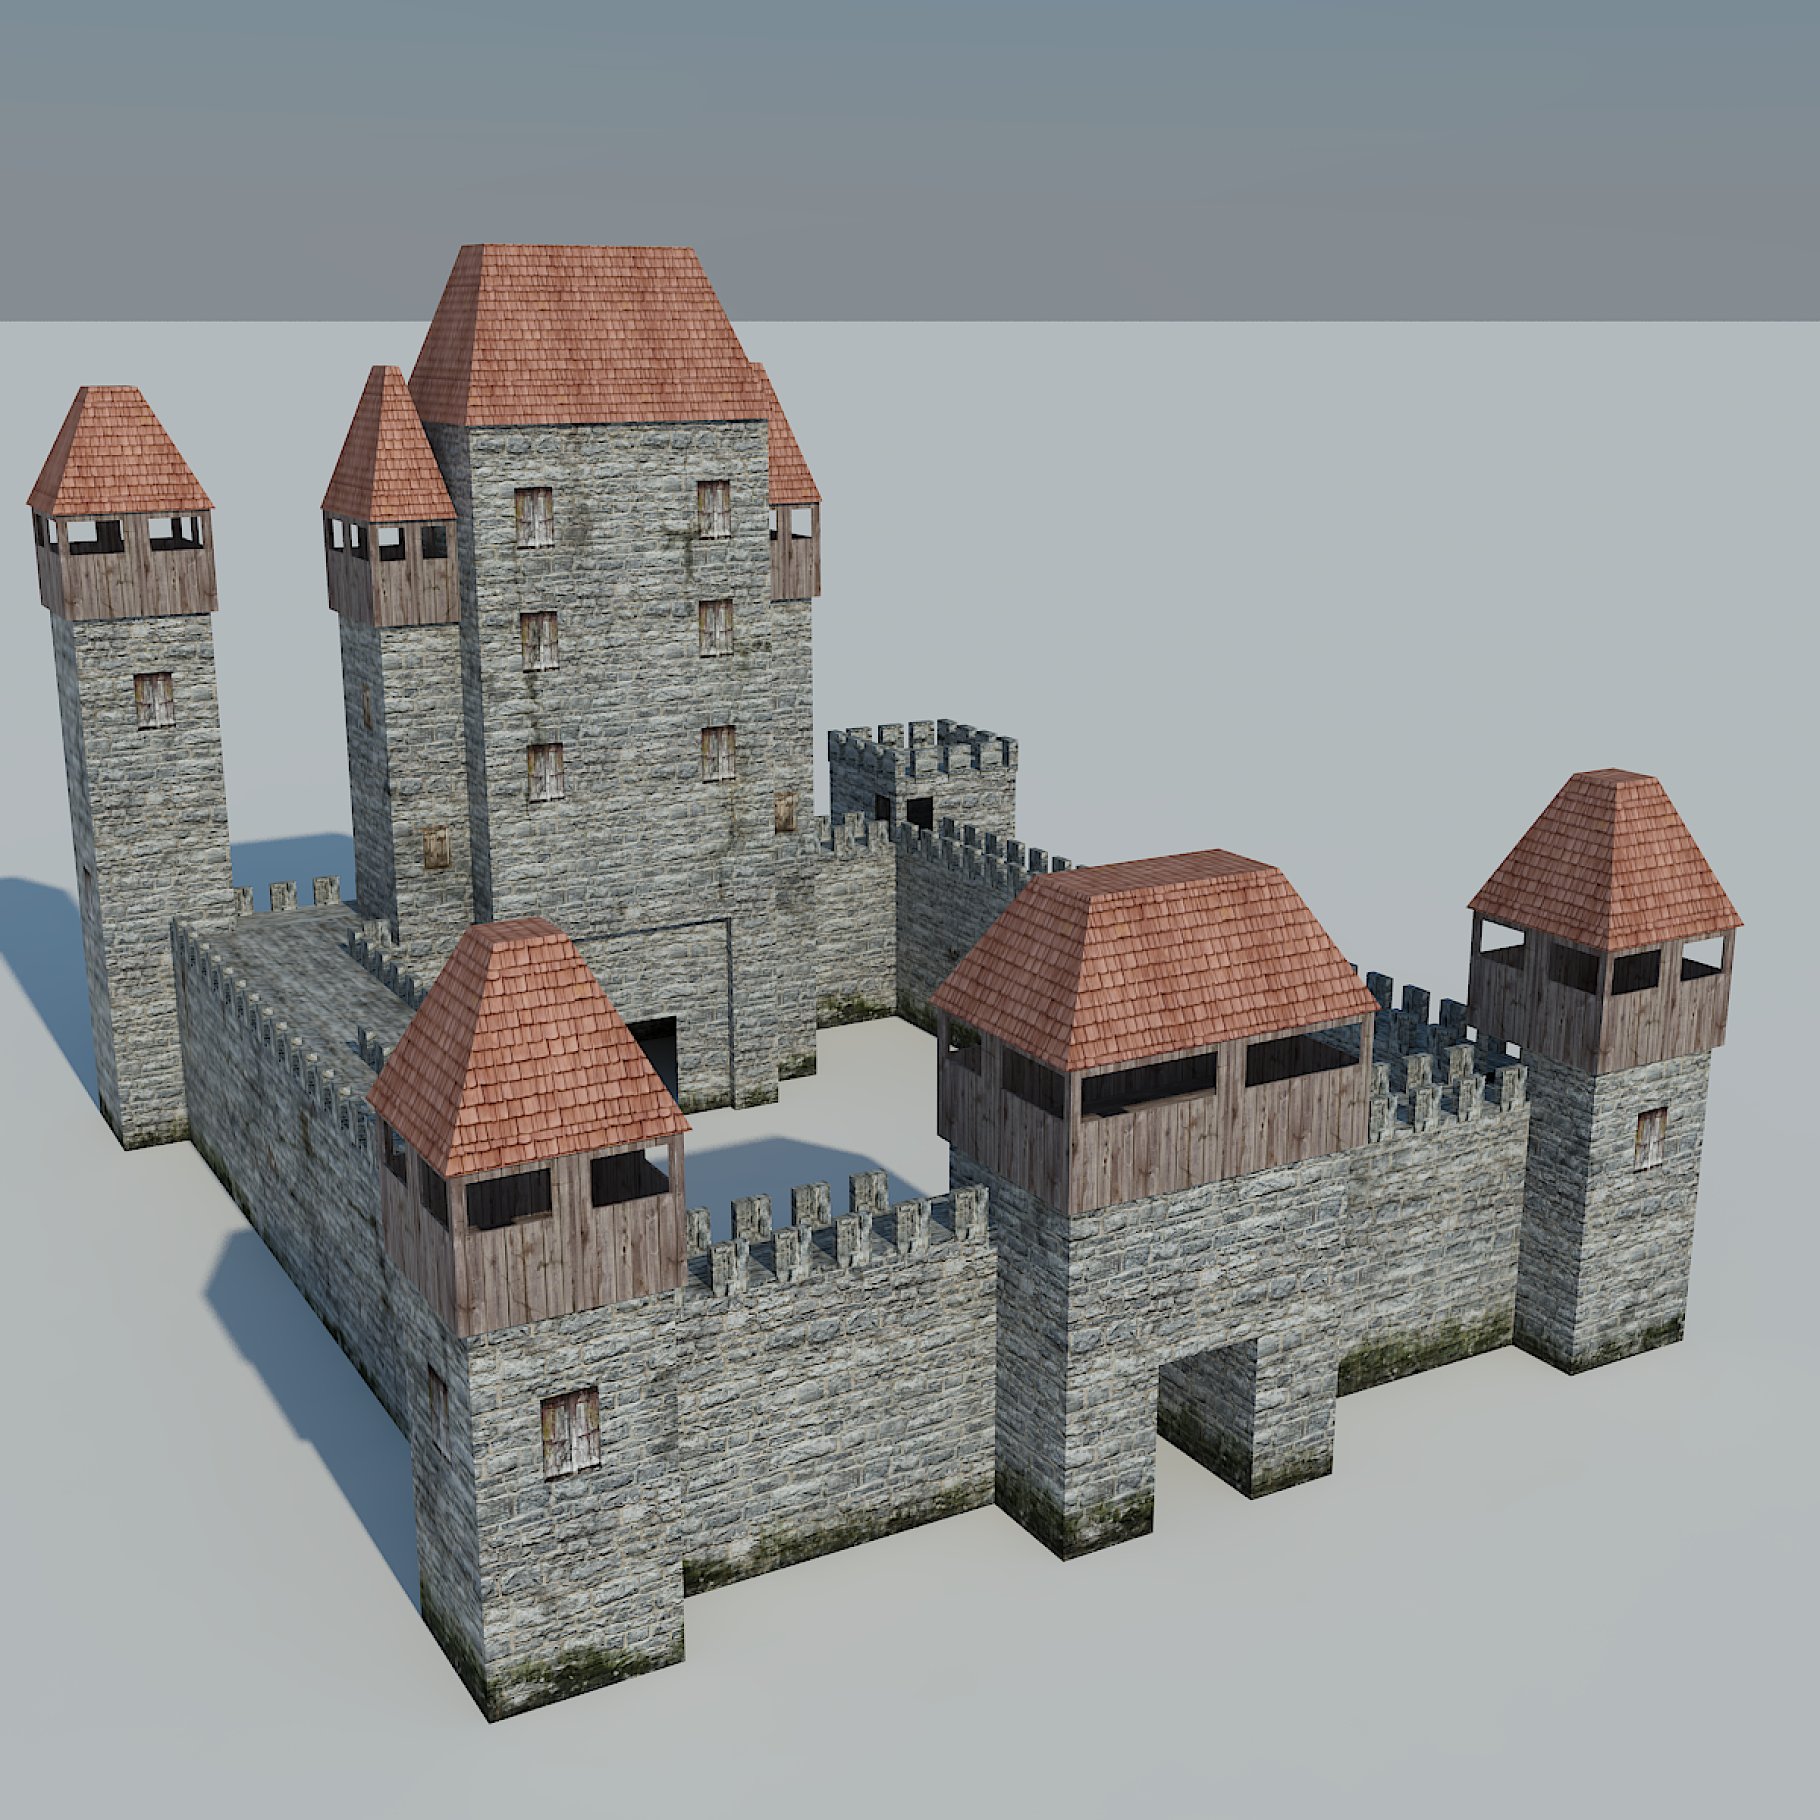 Picture of a castle with brown tiles.